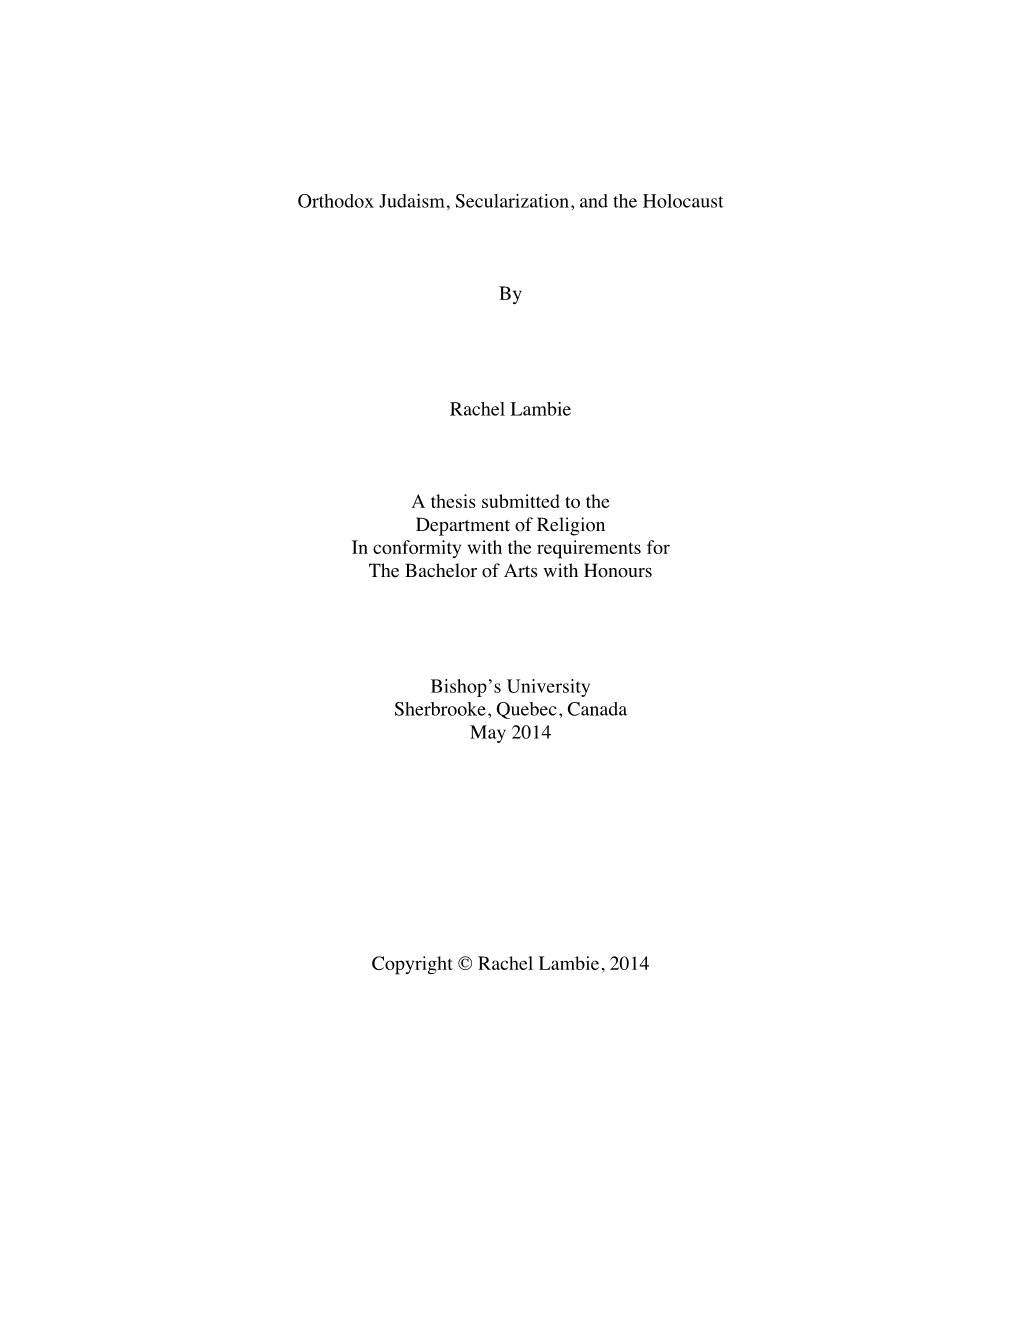 Orthodox Judaism, Secularization, and the Holocaust by Rachel Lambie a Thesis Submitted to the Department of Religion in Conform